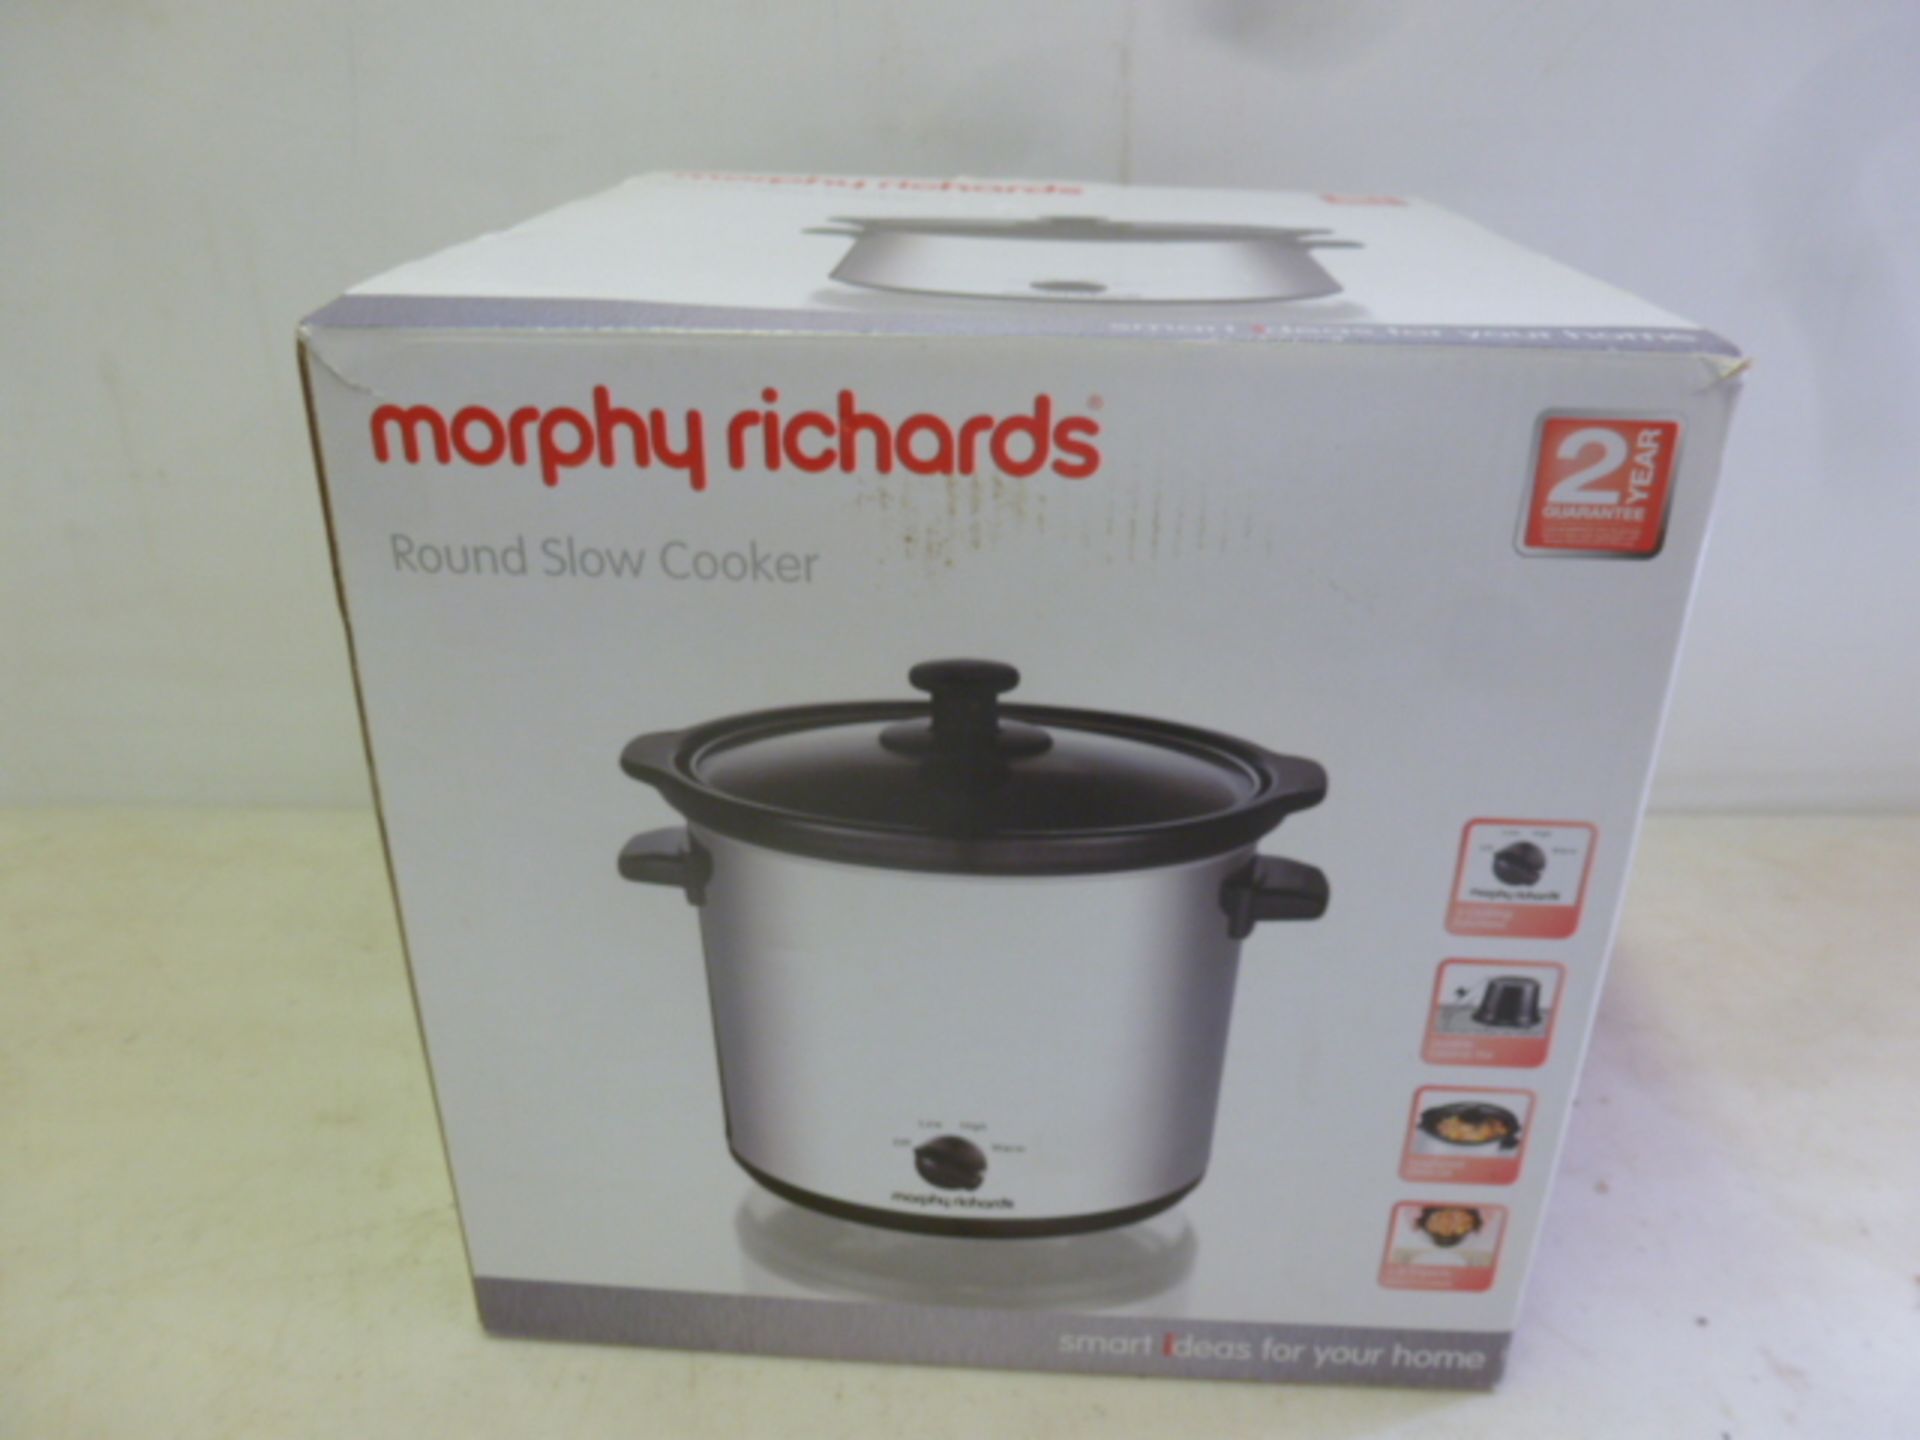 New/Boxed Morphy Richards Round Slow Cooker, Model 46006.